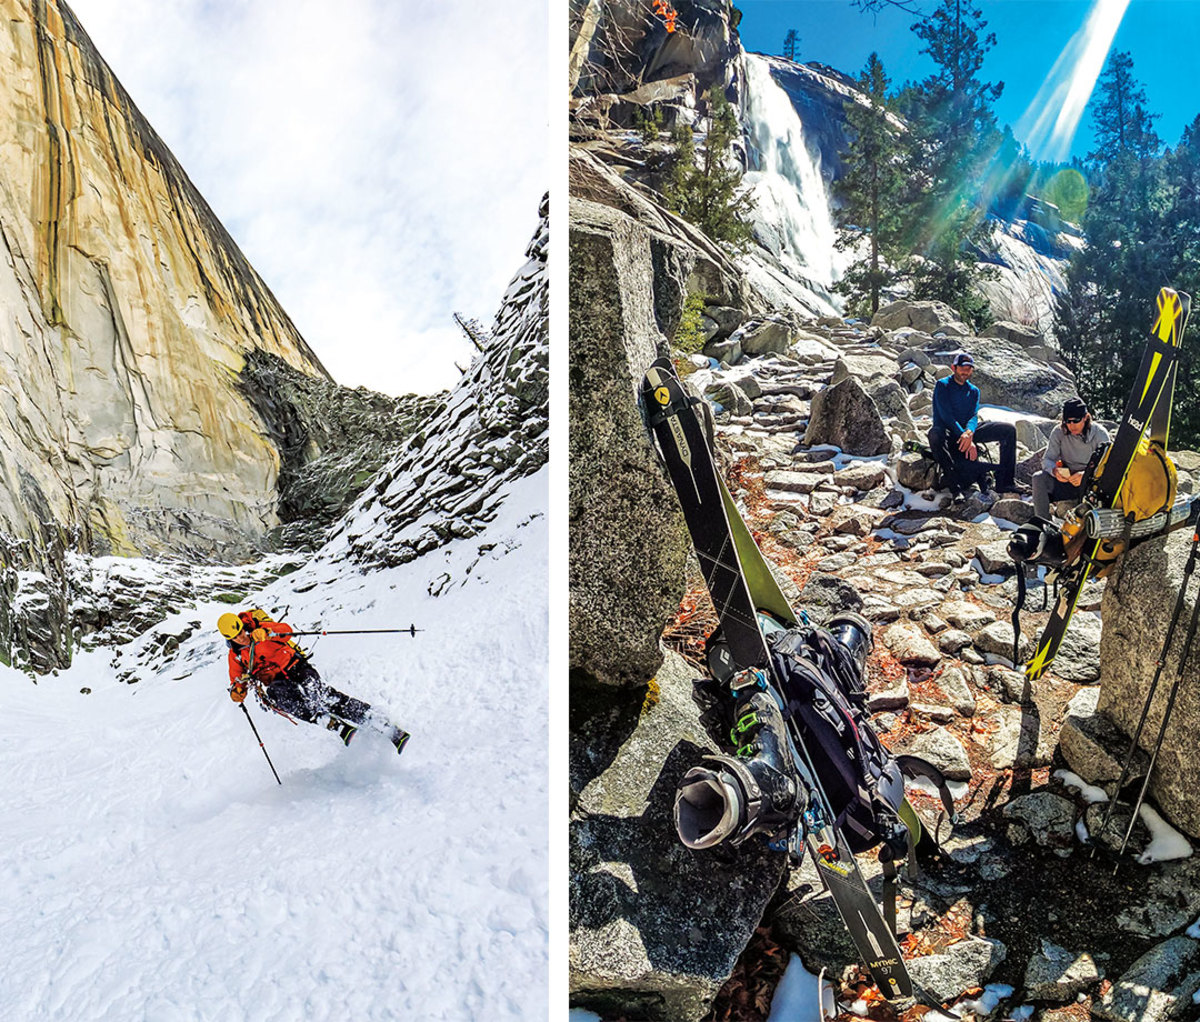 Two images shown. Left image is man skiing down snow-covered granite dome. Right shows trekkers taking a break in wooded area. 